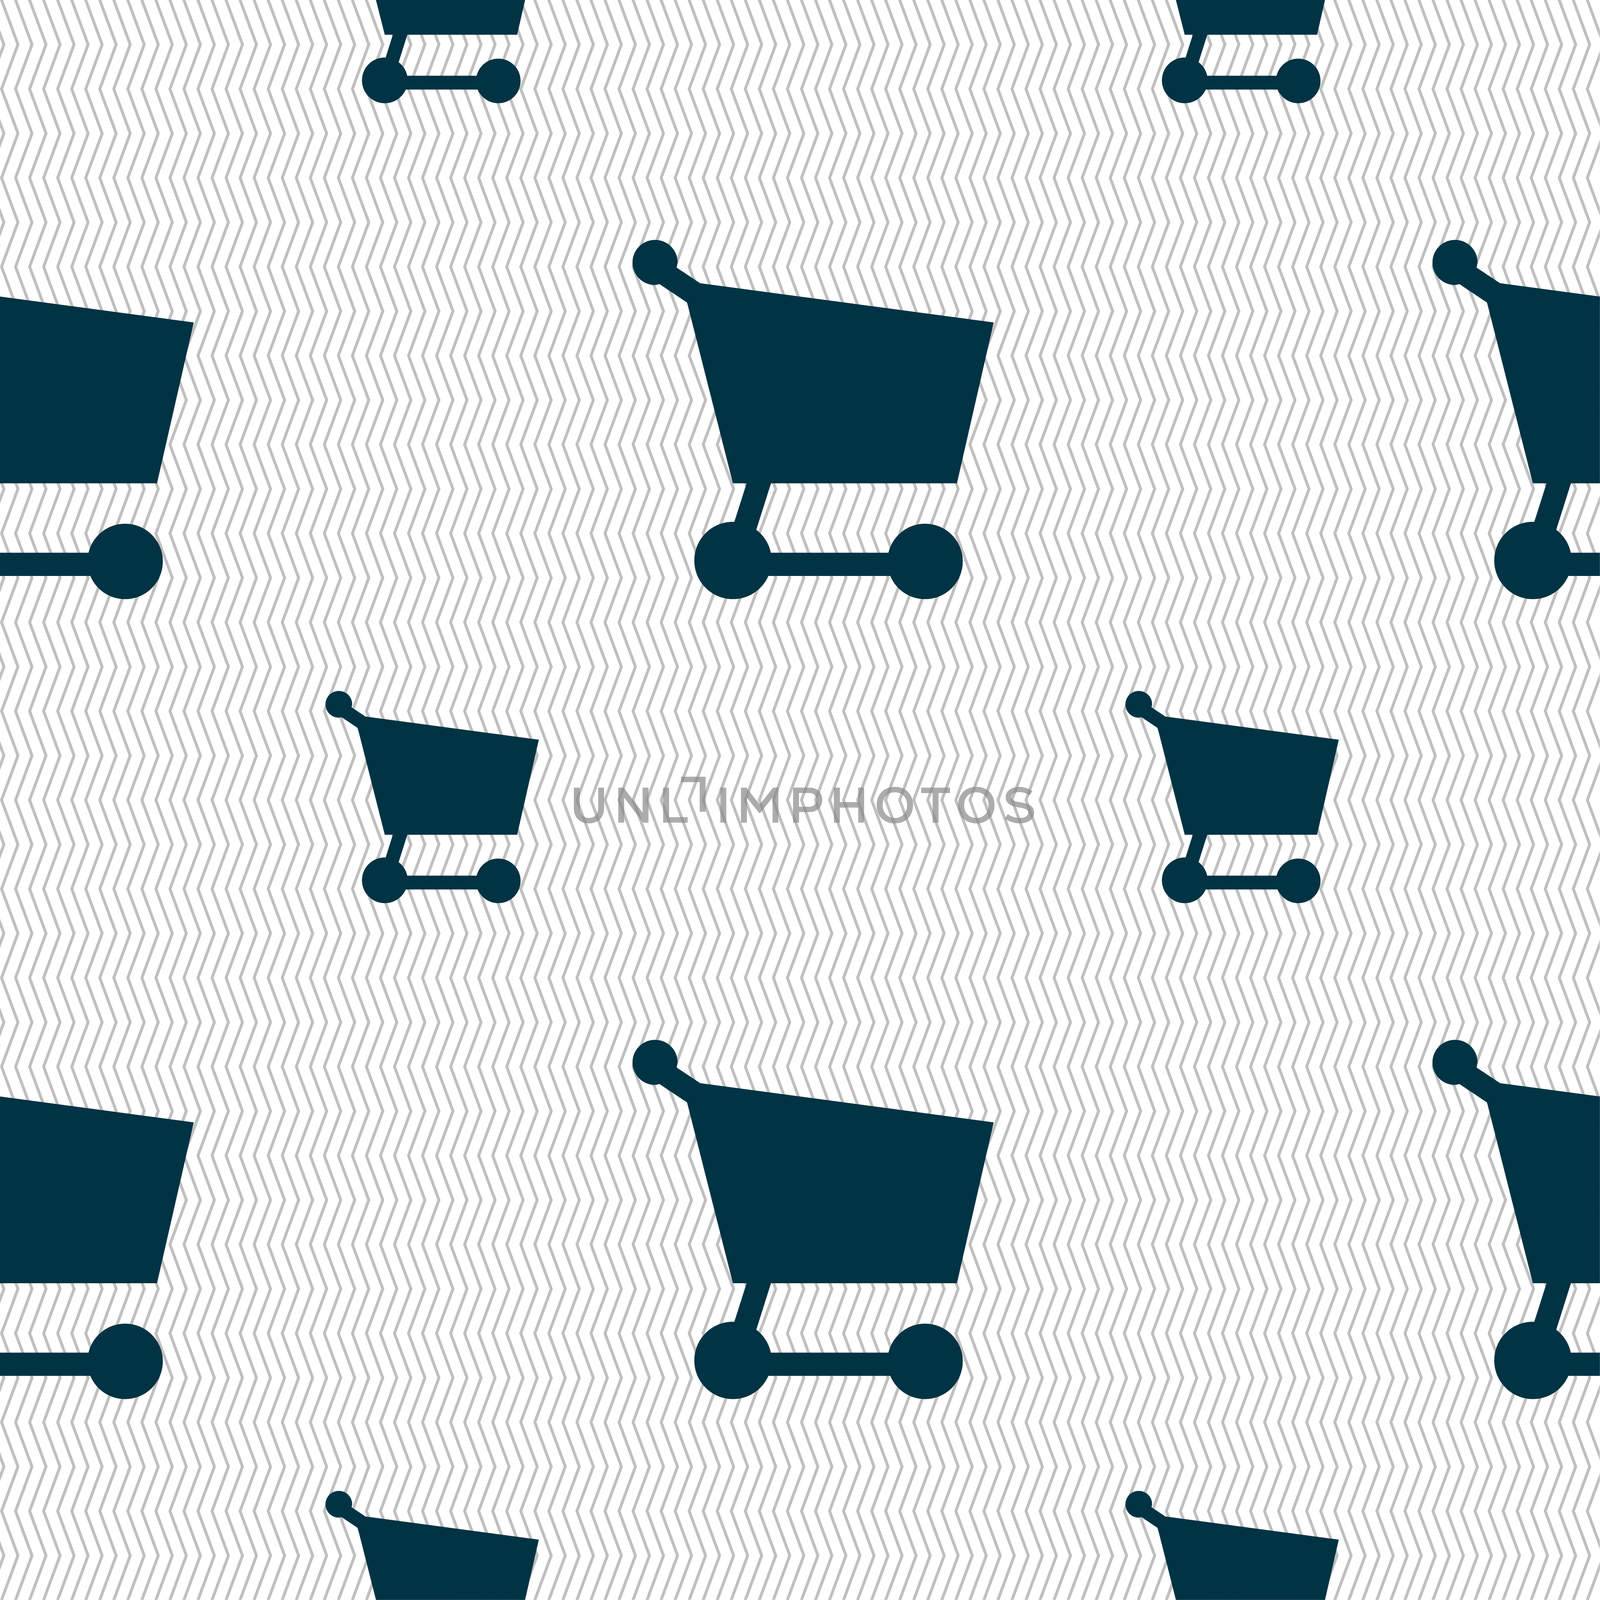 Shopping basket icon sign. Seamless pattern with geometric texture. illustration